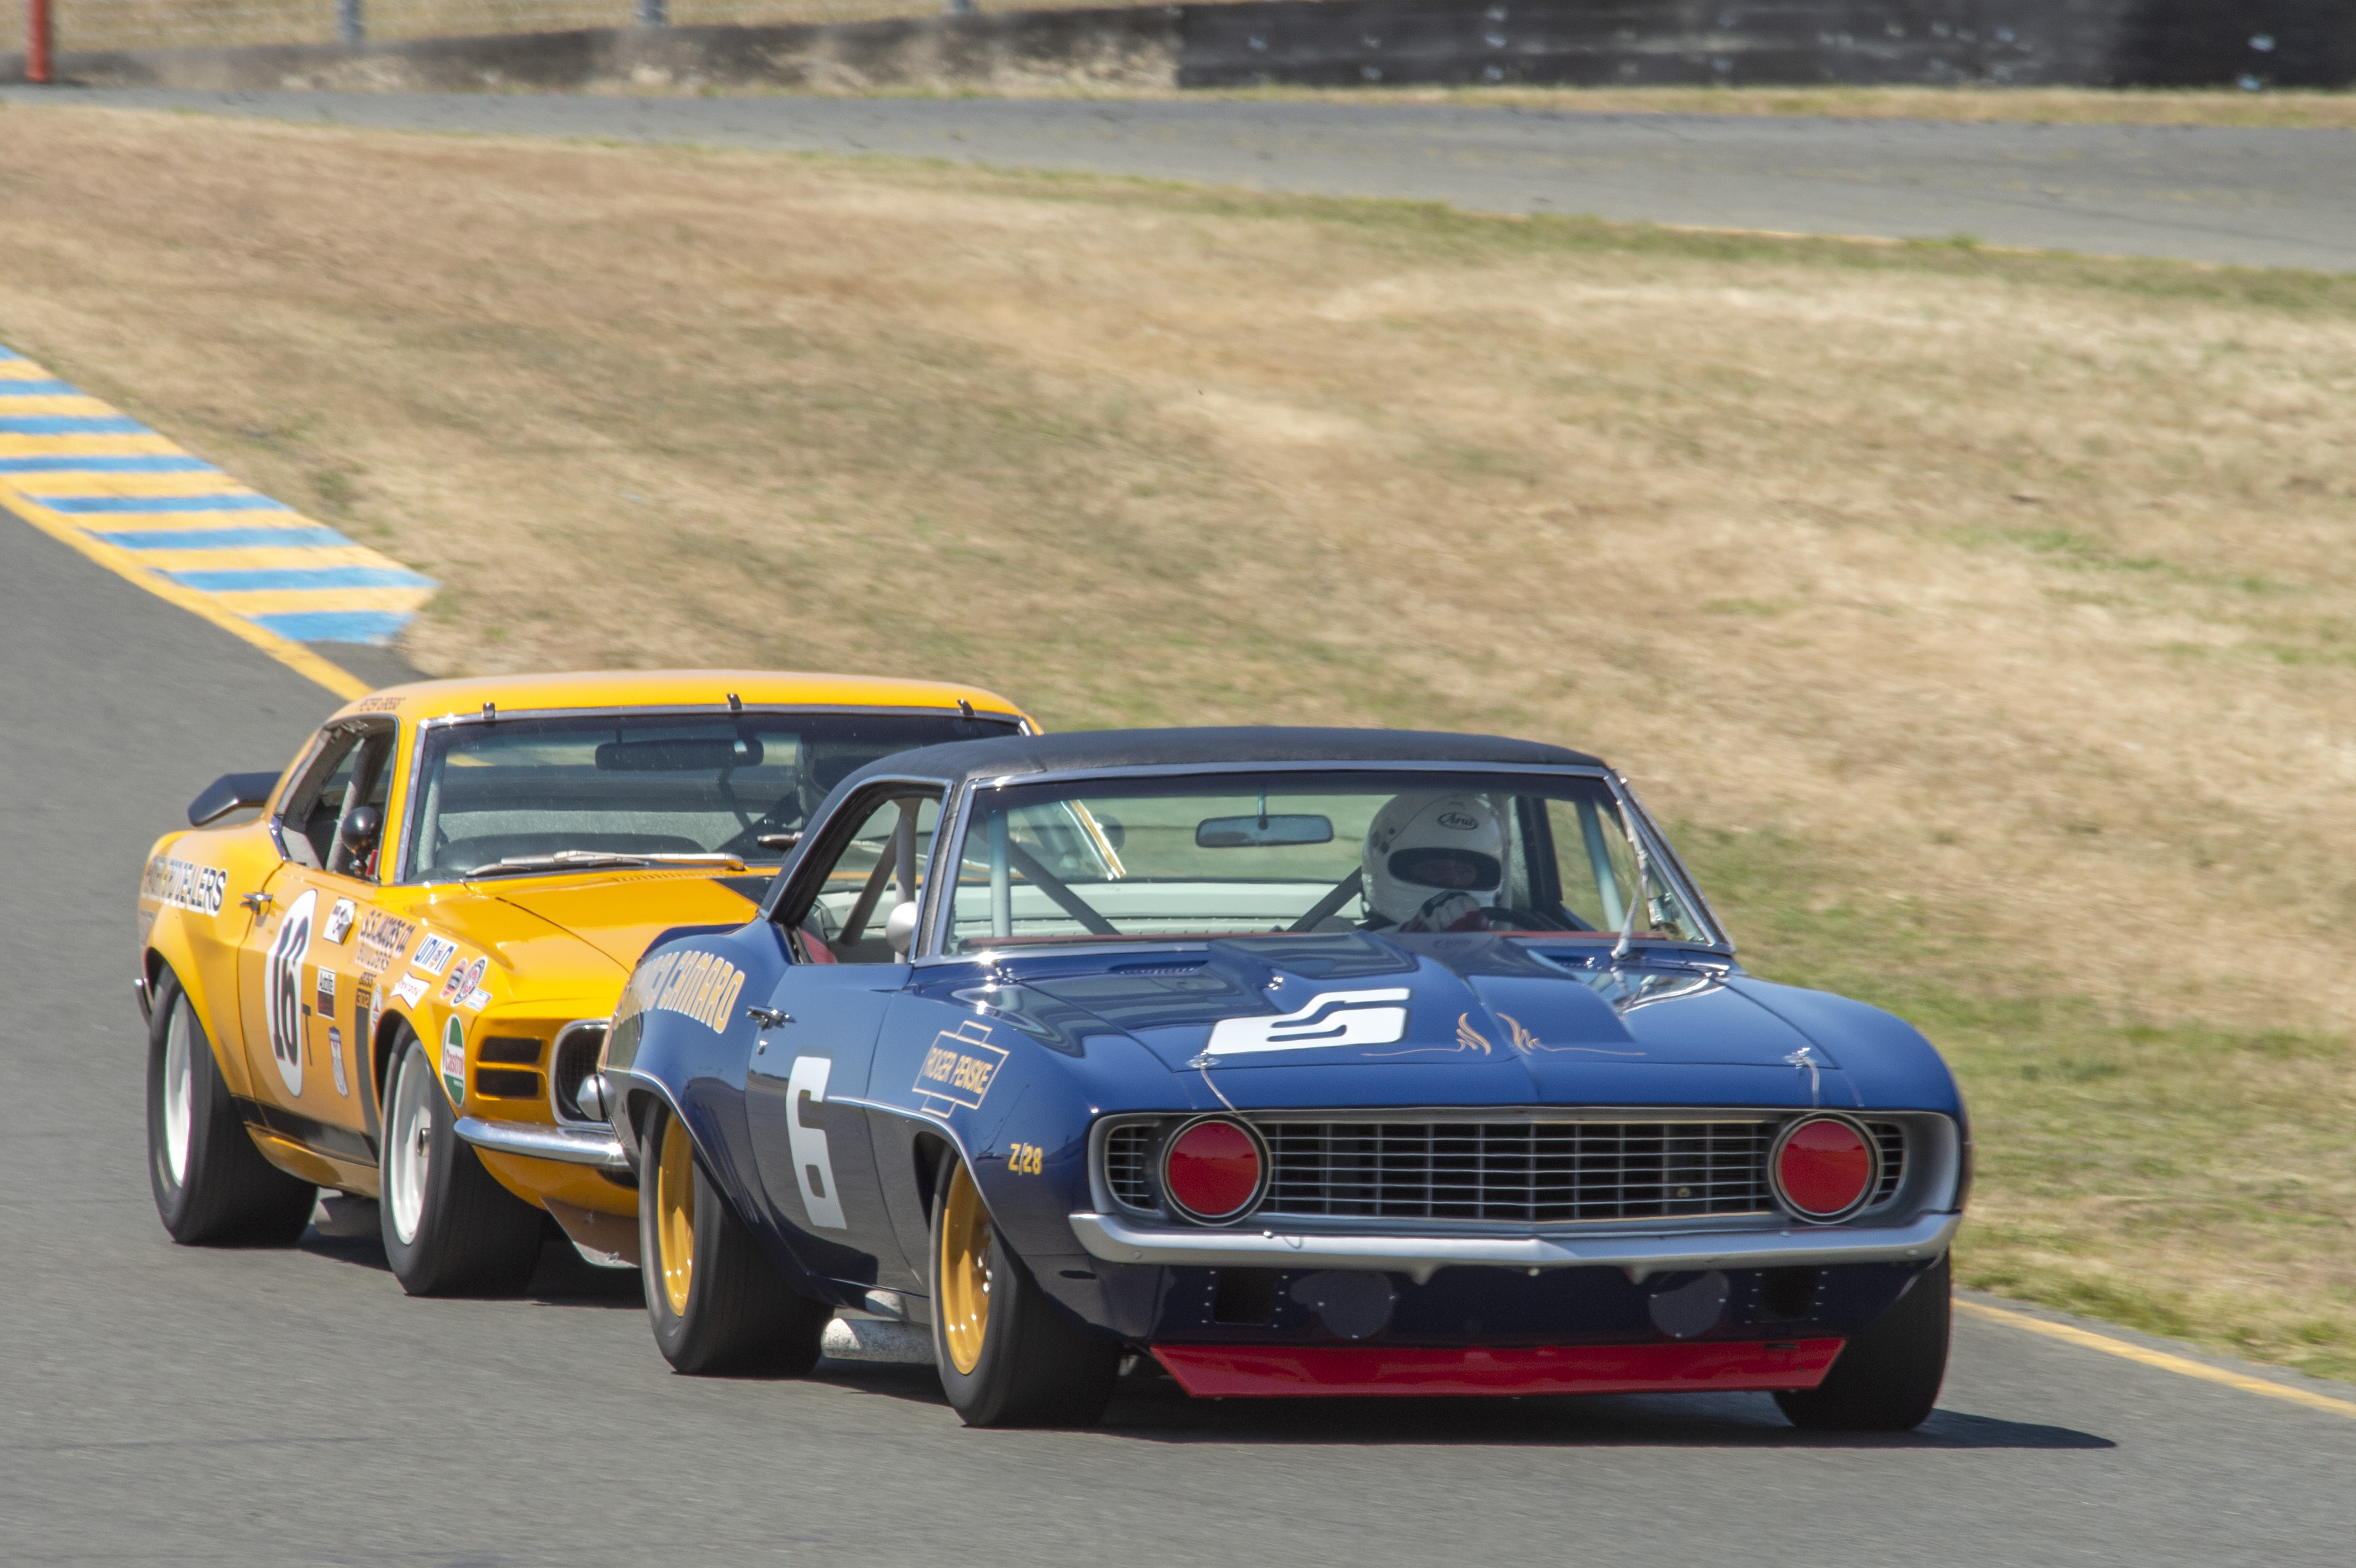 Historic Trans-Am Series Joins 2020 Chevrolet Detroit Grand Prix presented by Lear Lineup